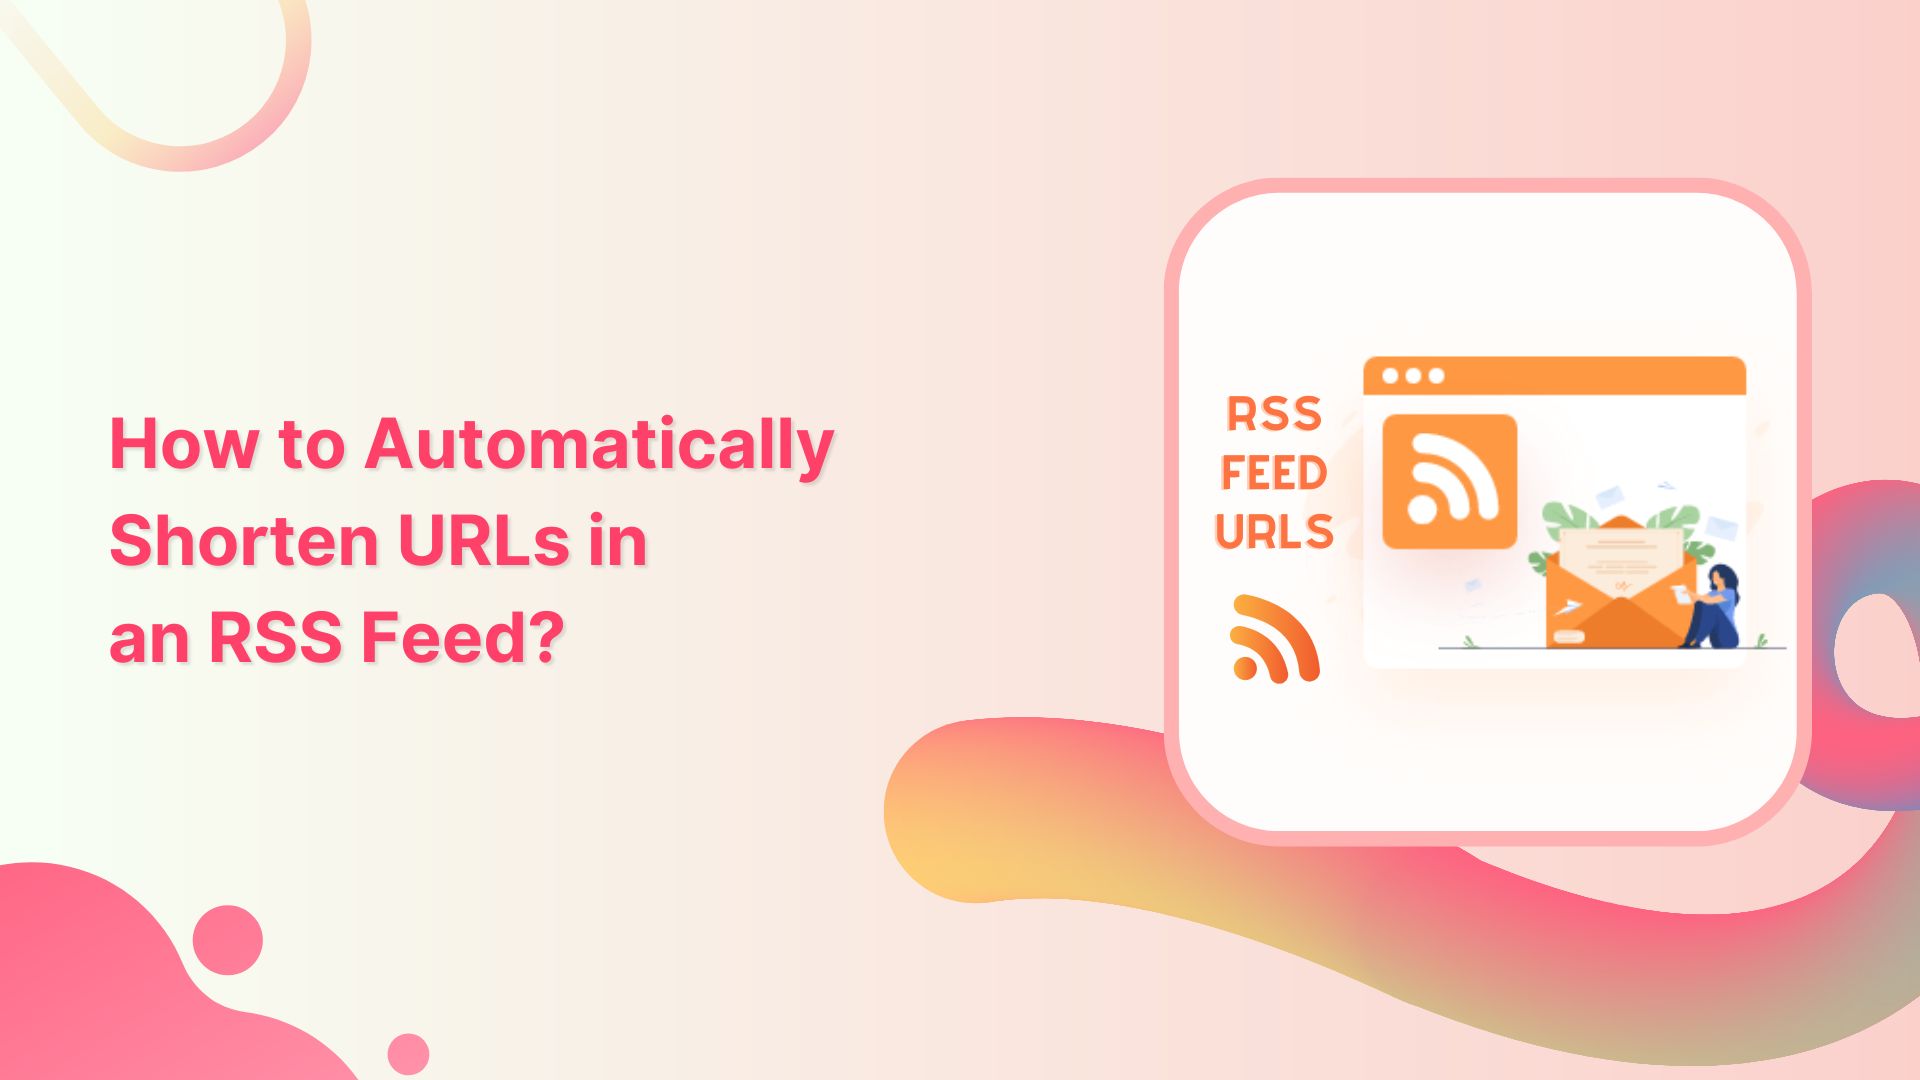 How to Automatically Shorten URLs in an RSS Feed?